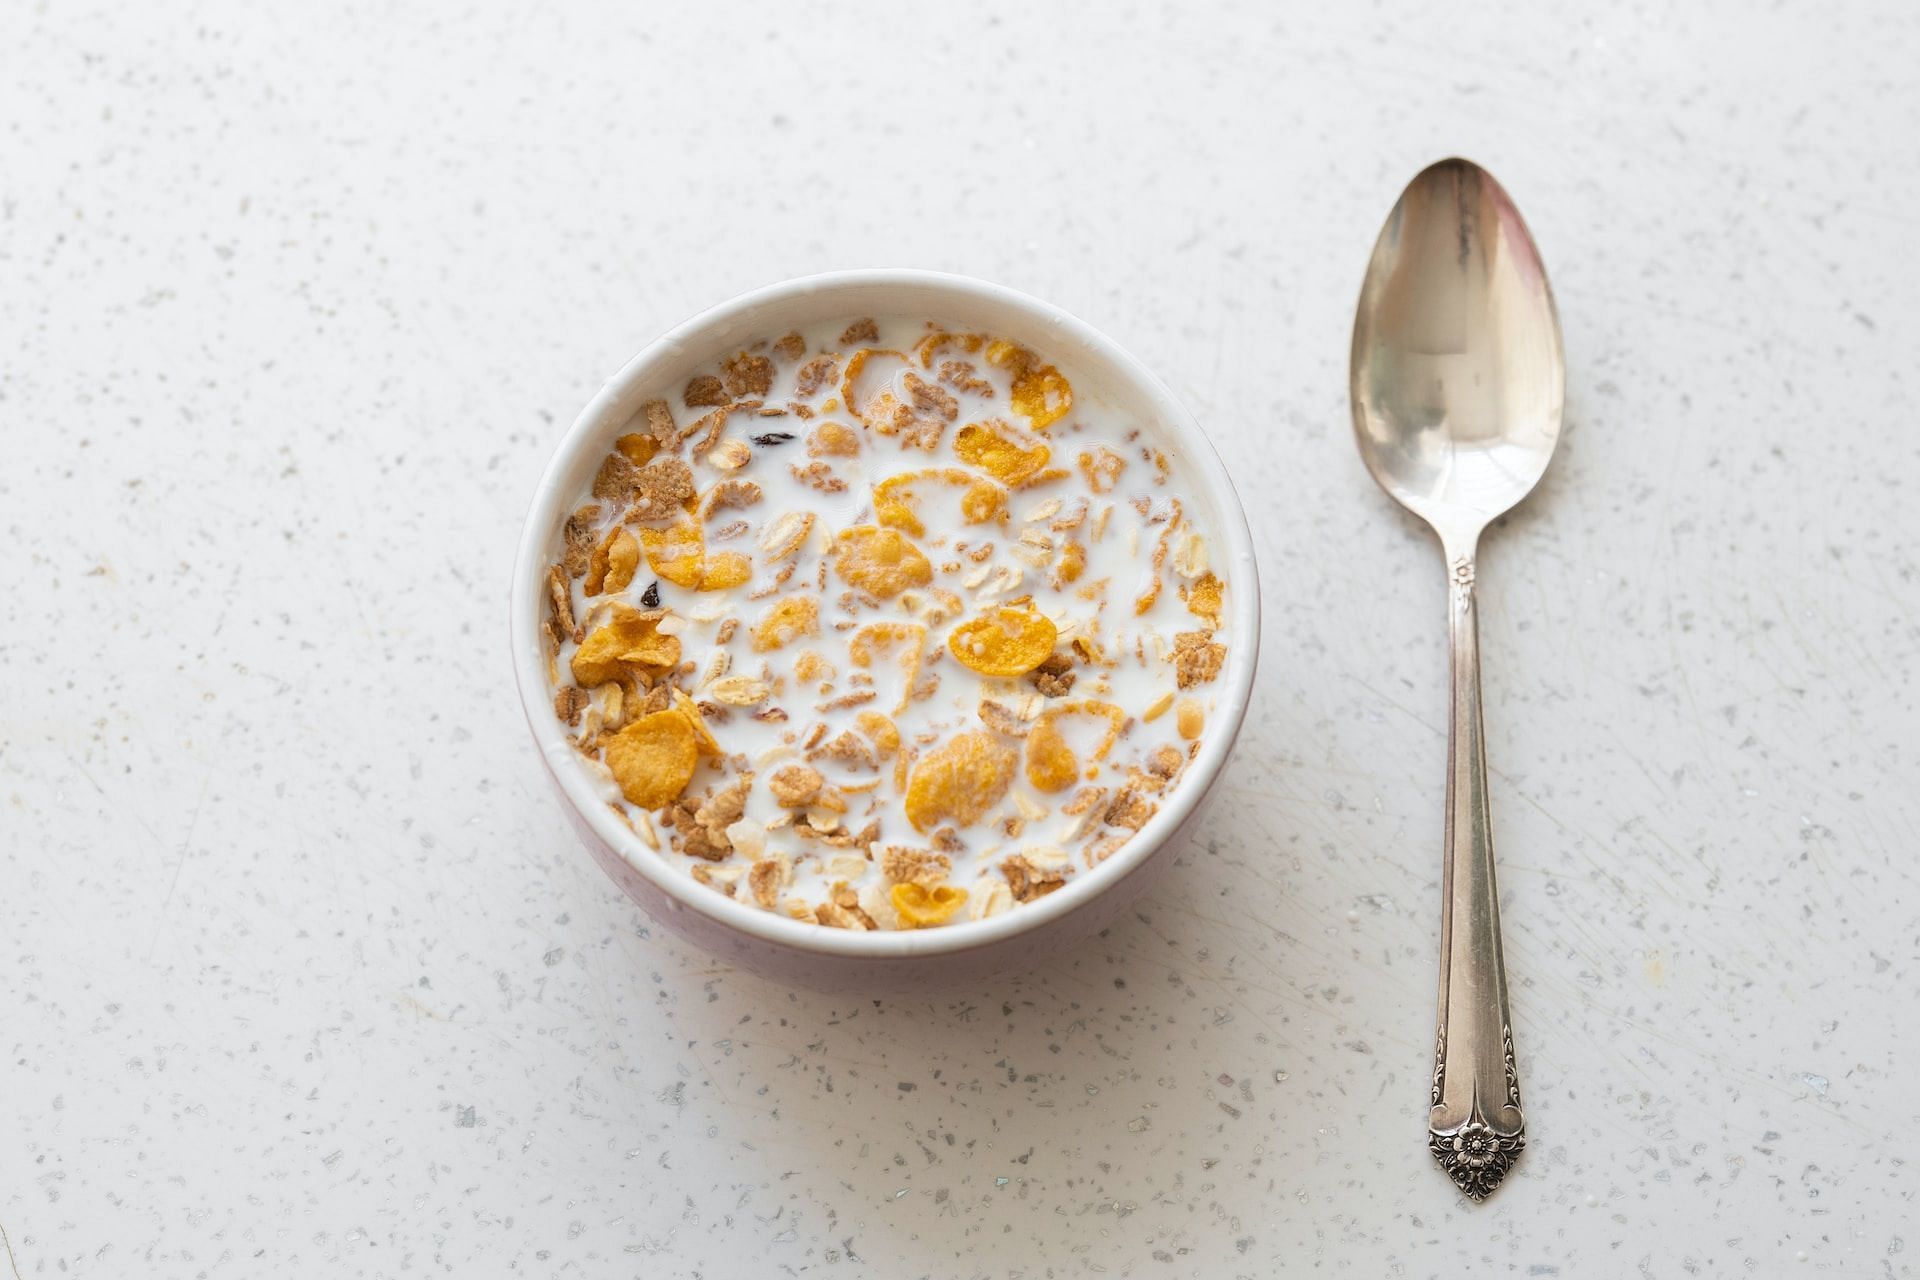 Check out the Honey Bunches of Oats nutrition! (Photo via engin akyurt/Unsplash)